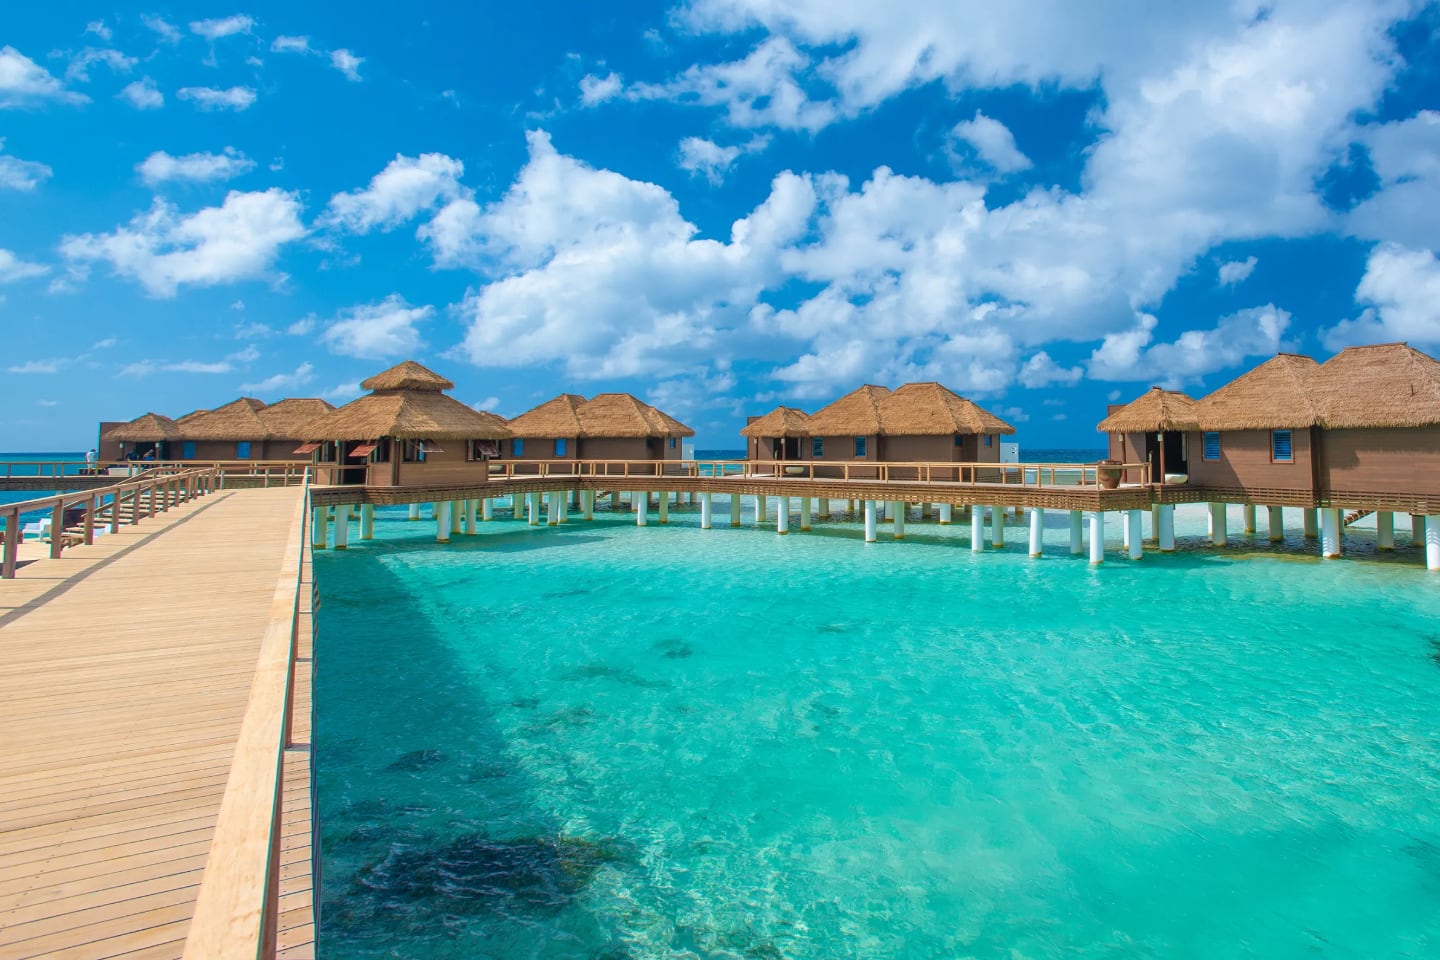 overwater bungalows over clear turquoise water in Jamaica